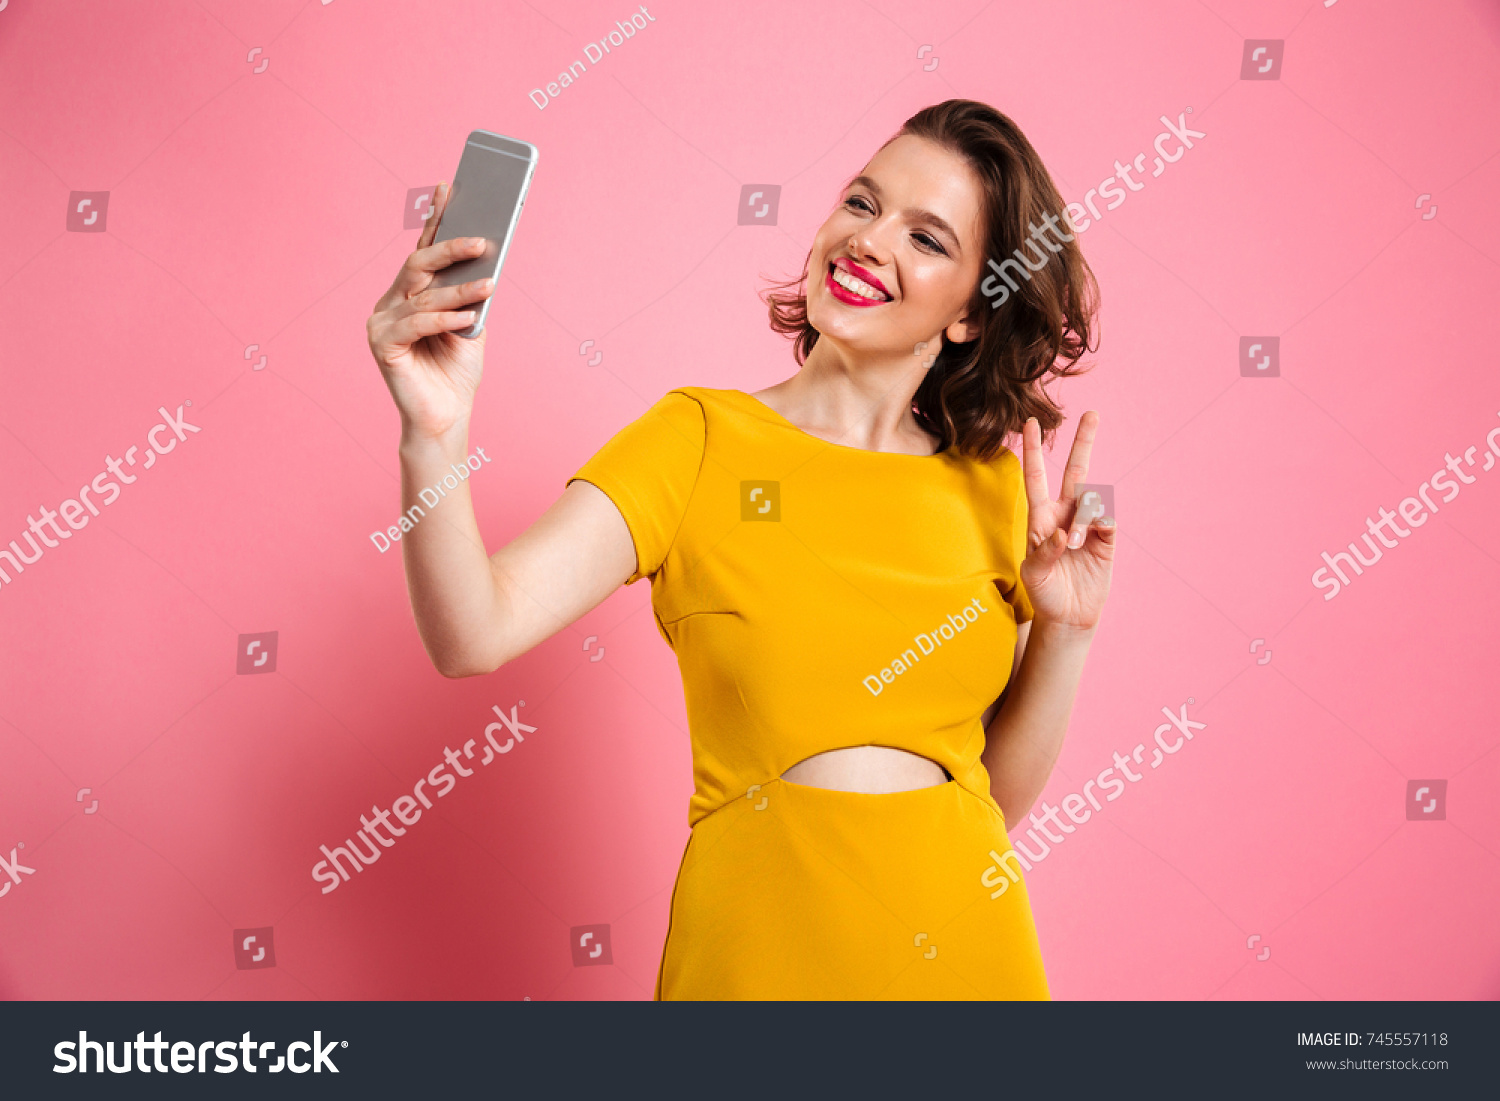 Cute pretty girl with bright makeup showing peace gesture while taking selfie on mobile phone, isolated over pink background #745557118